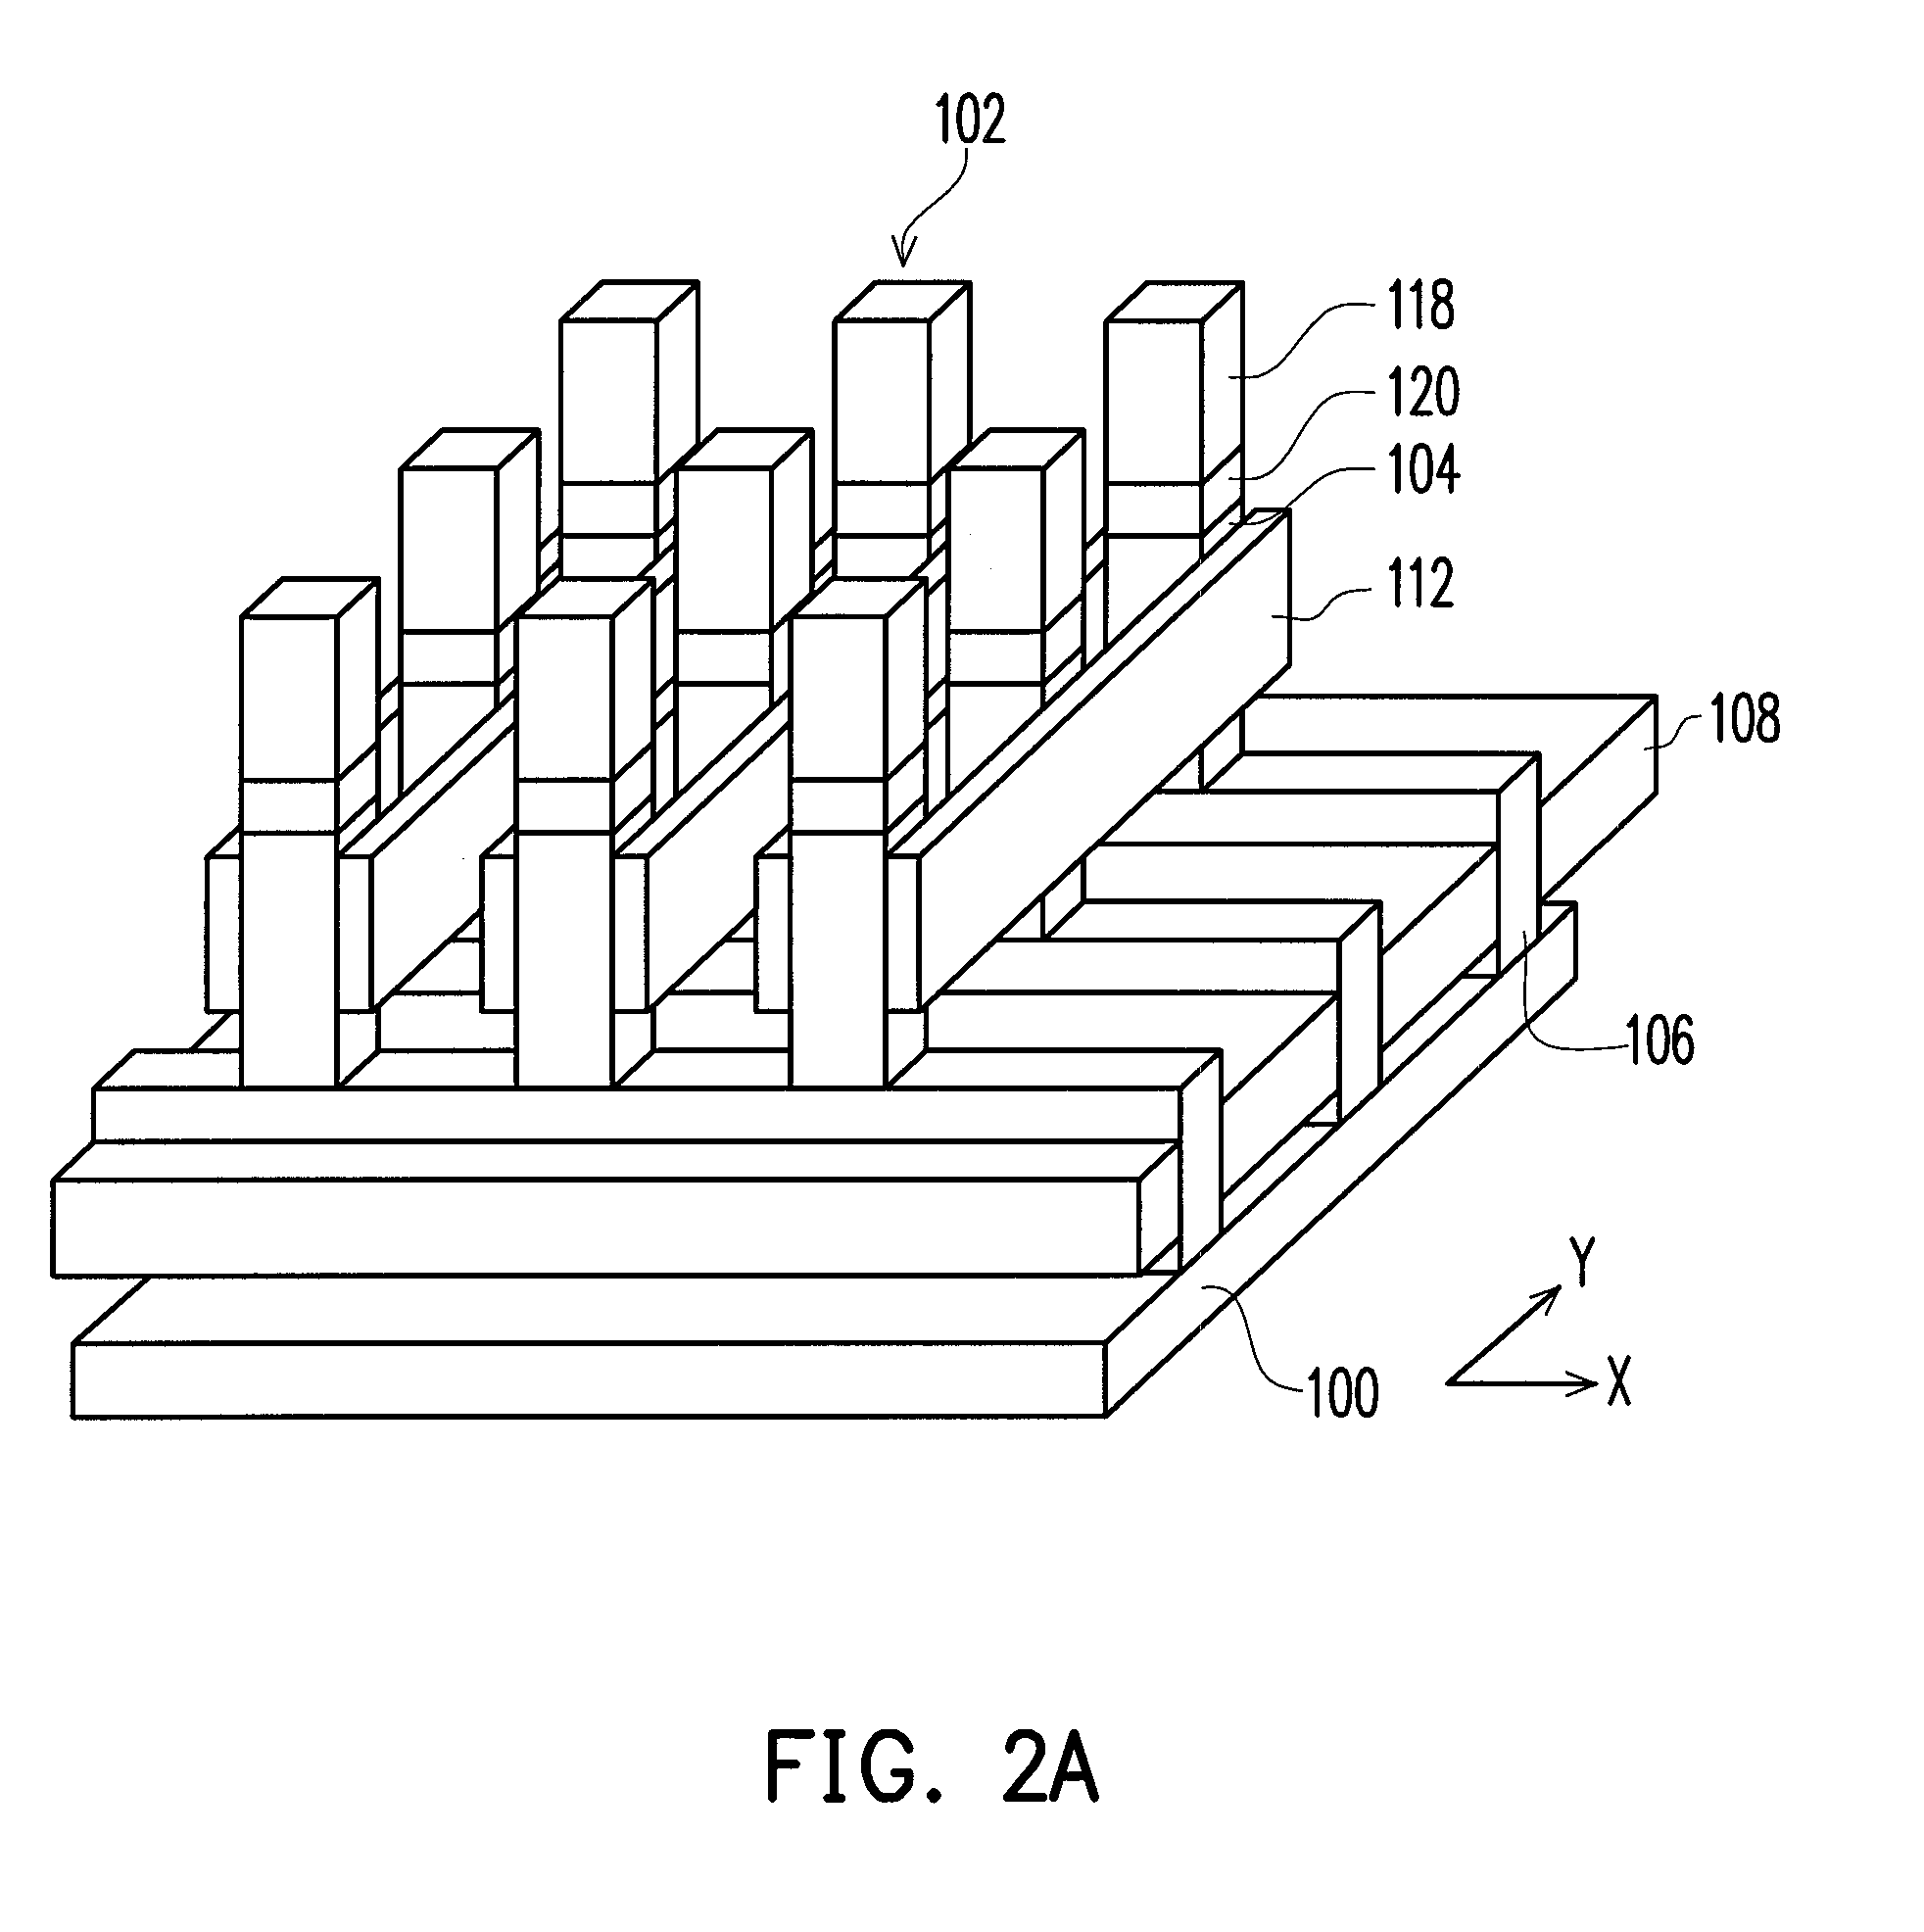 Dynamic random access memory cell and array having vertical channel transistor